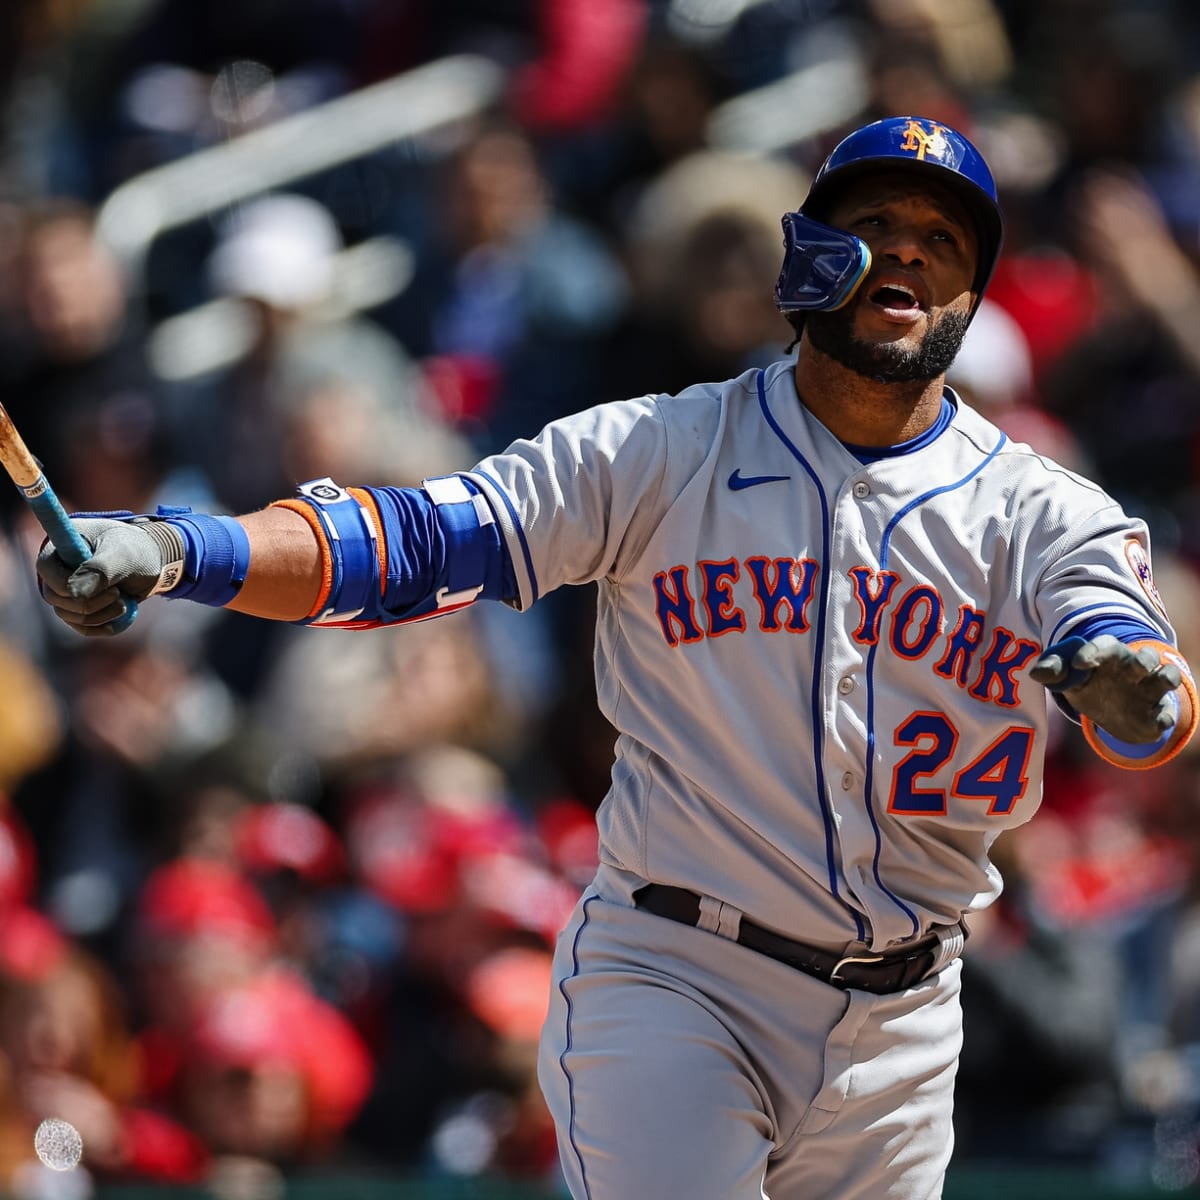 Robinson Cano gets first hit in Majors 